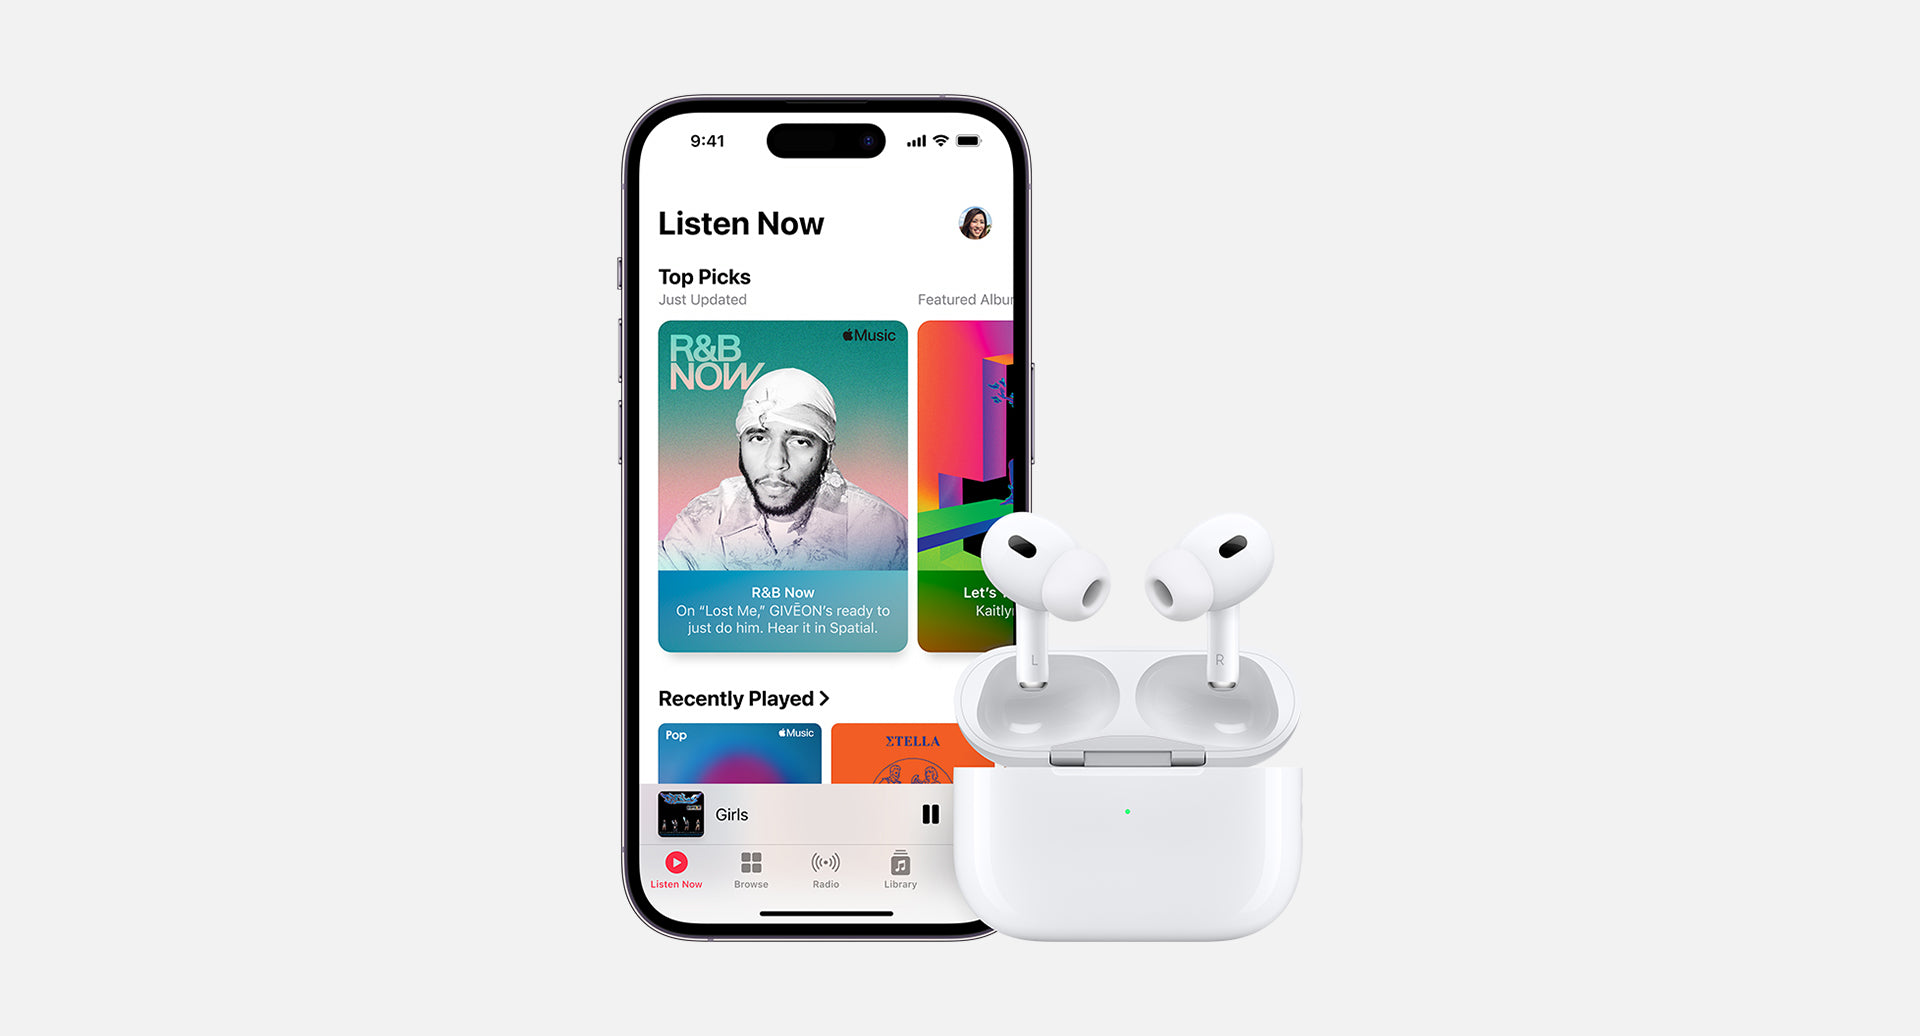 Apple Airpods (3rd Gen) with Lighting Charging Case